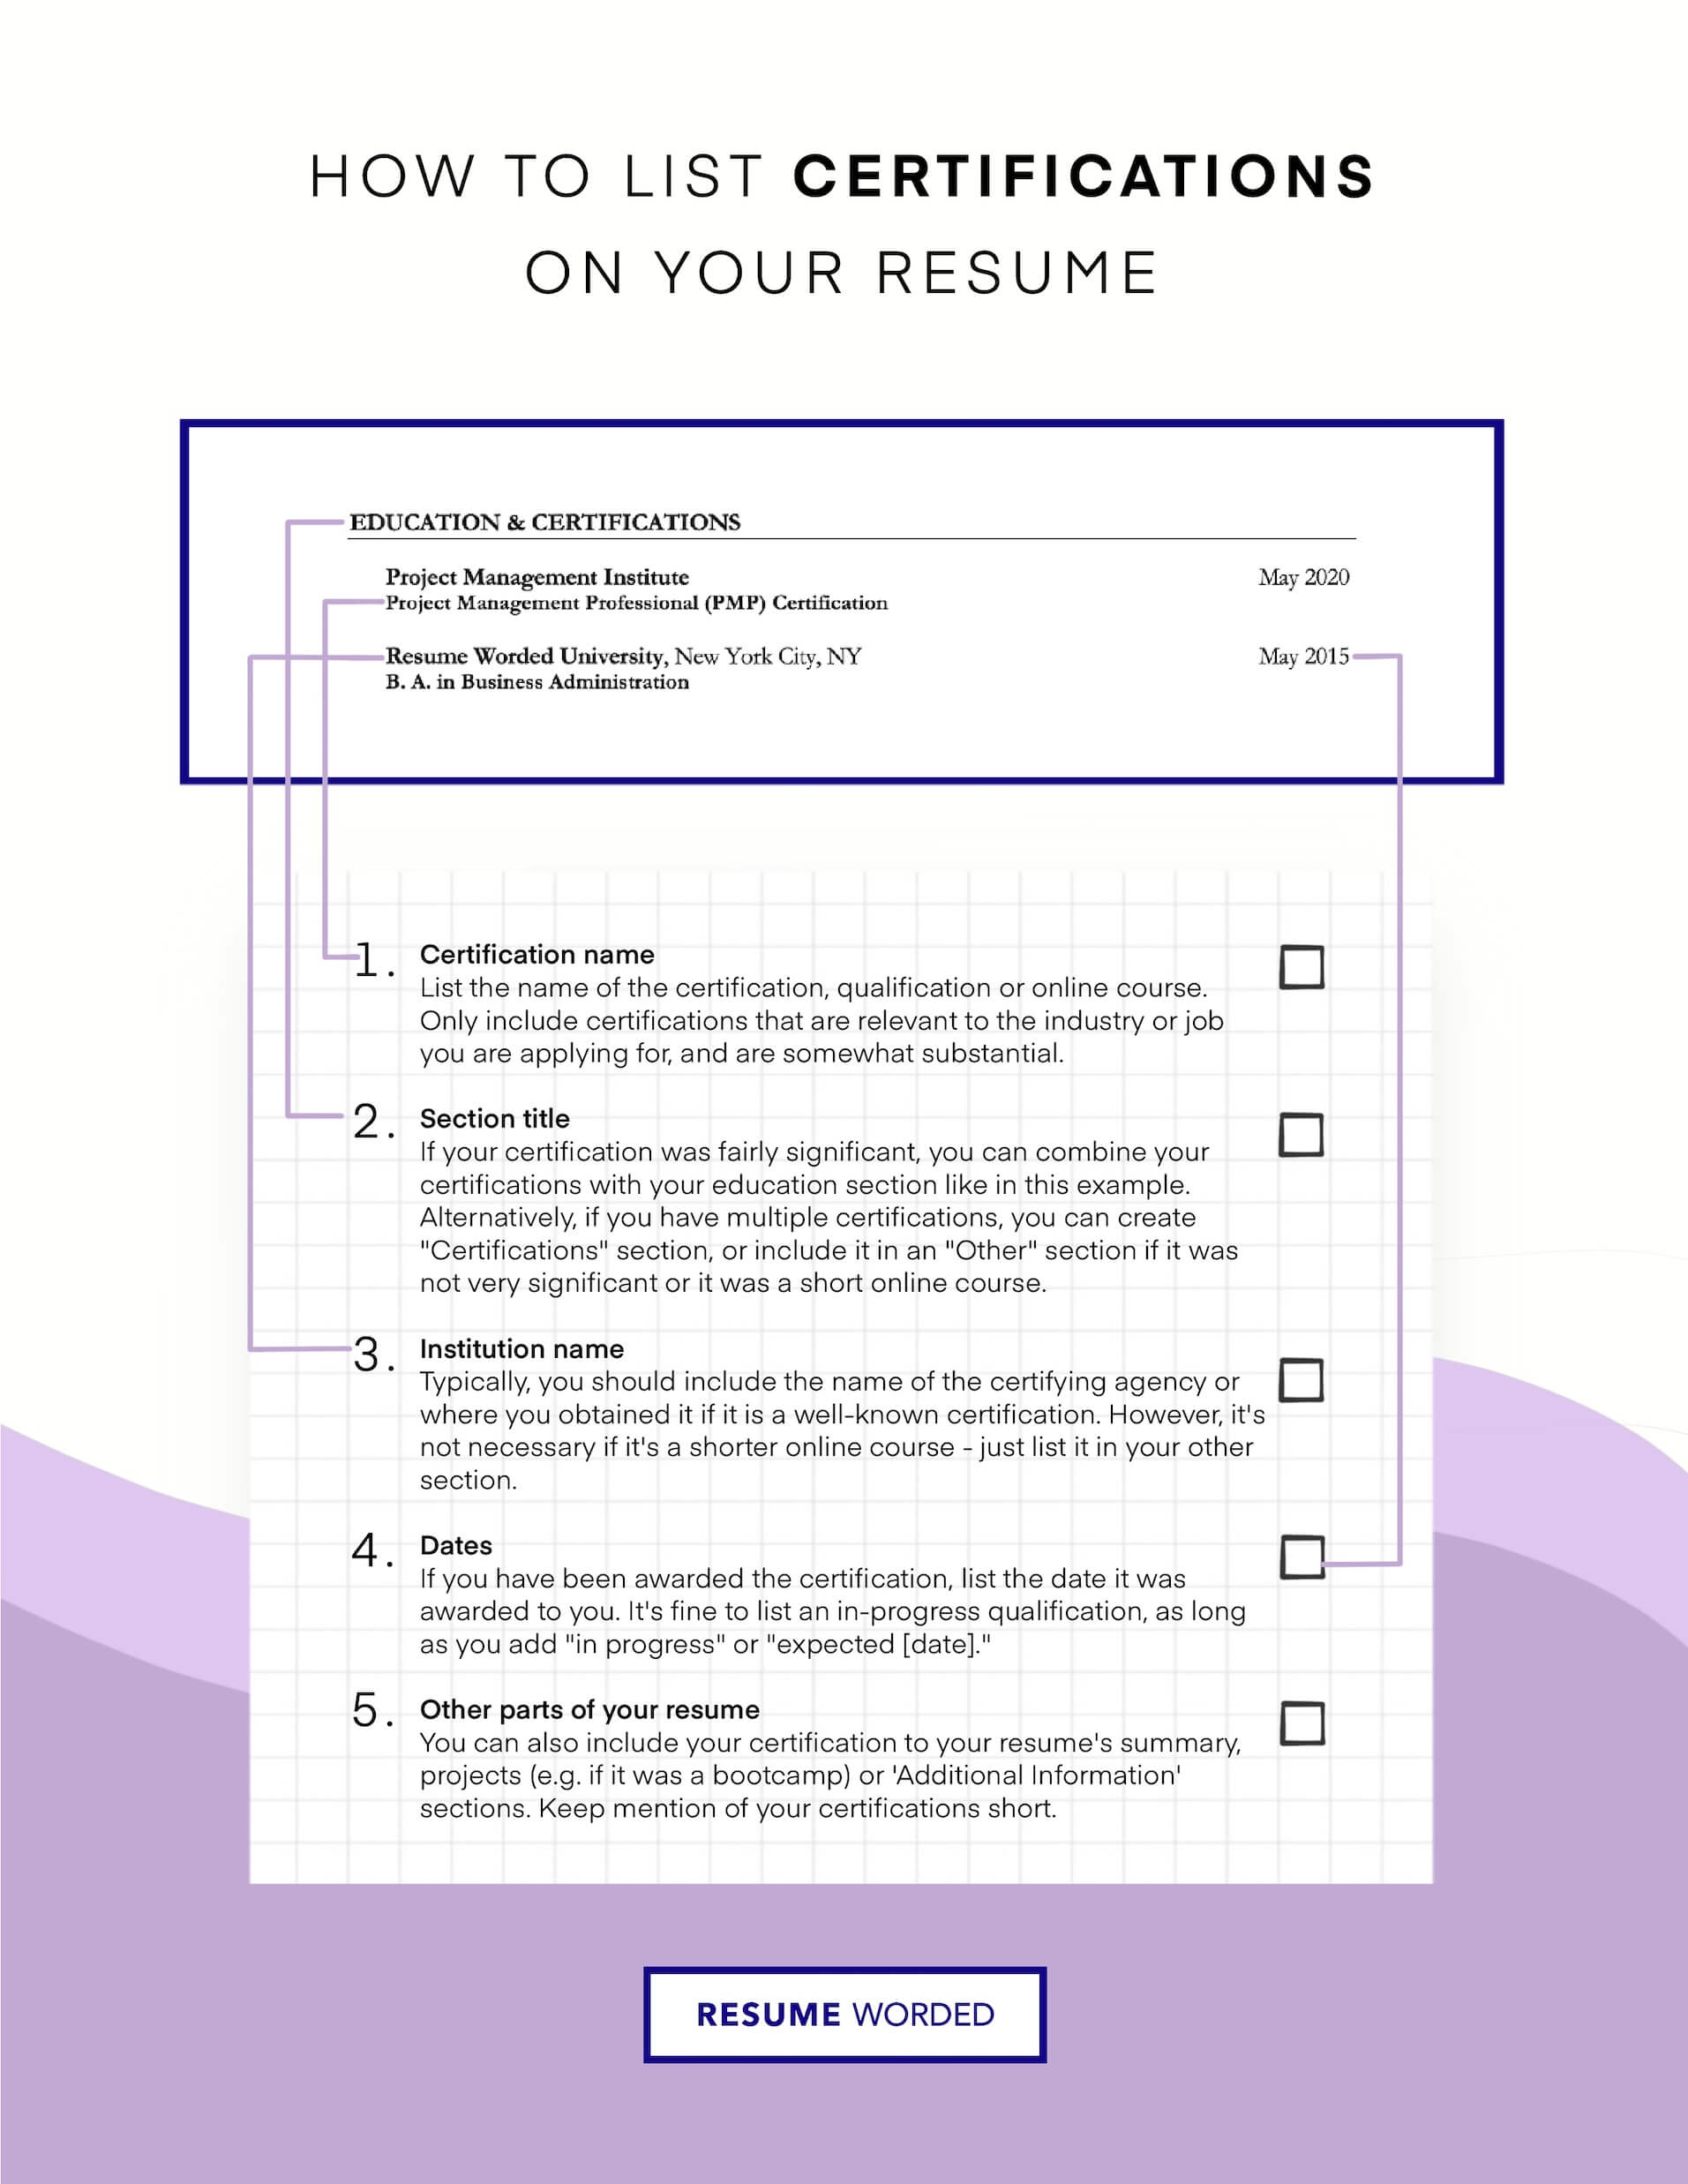 Showcase relevant certifications - Cyber Security Engineer Resume